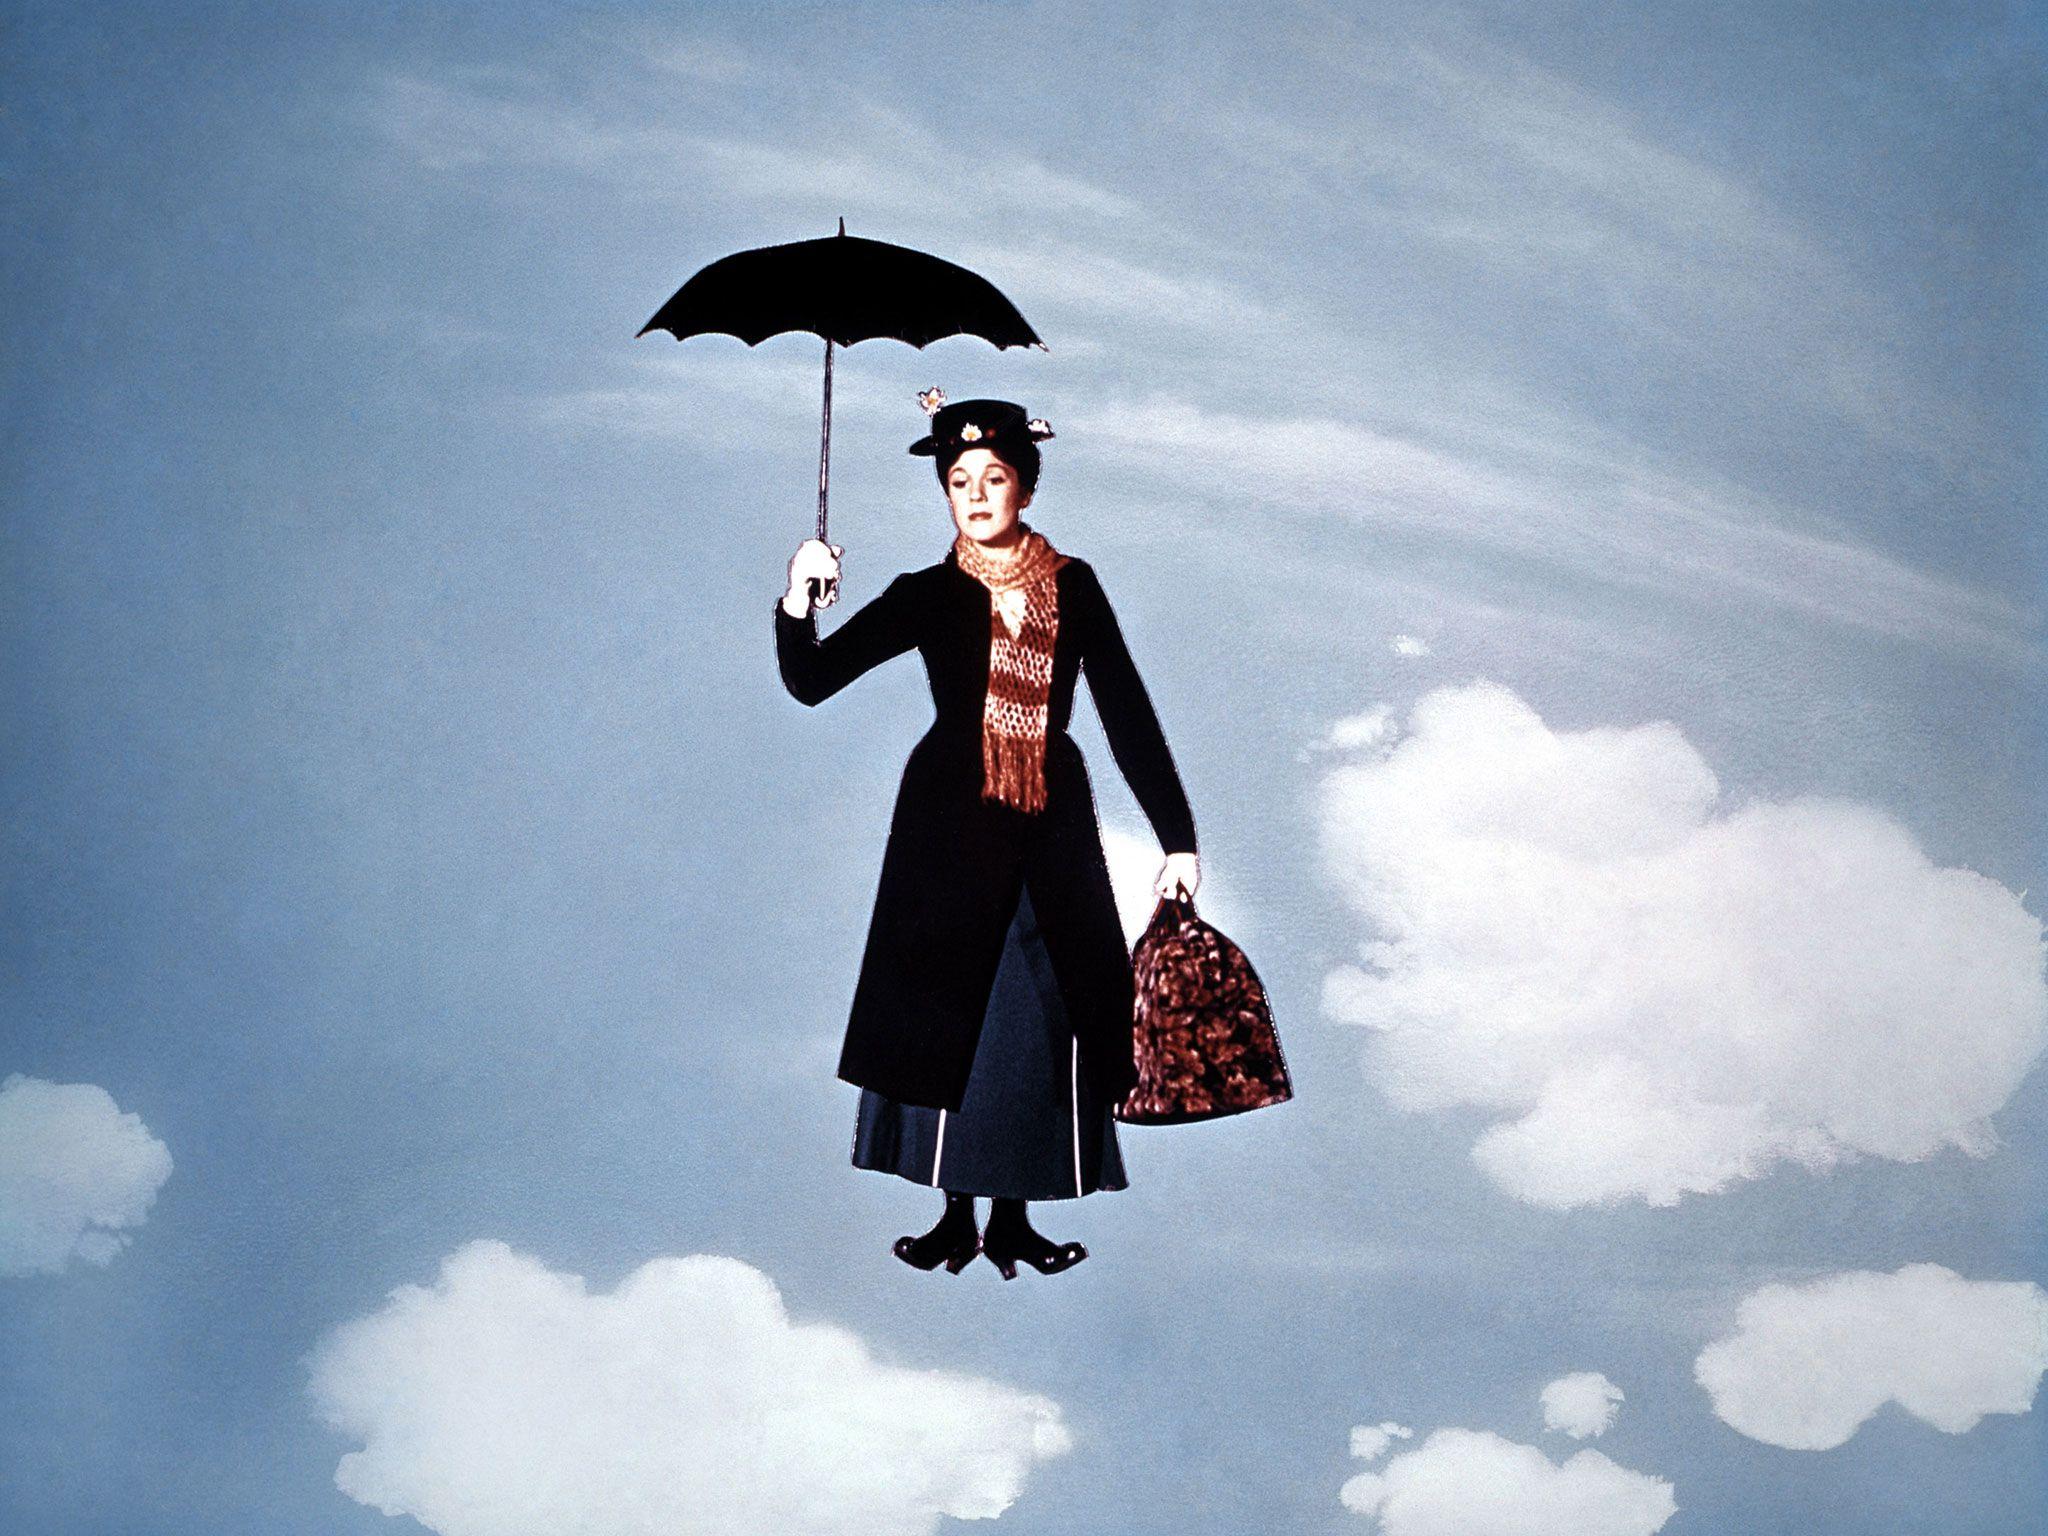 Mary Poppins or Mr Hyde, what type of drunk are you?